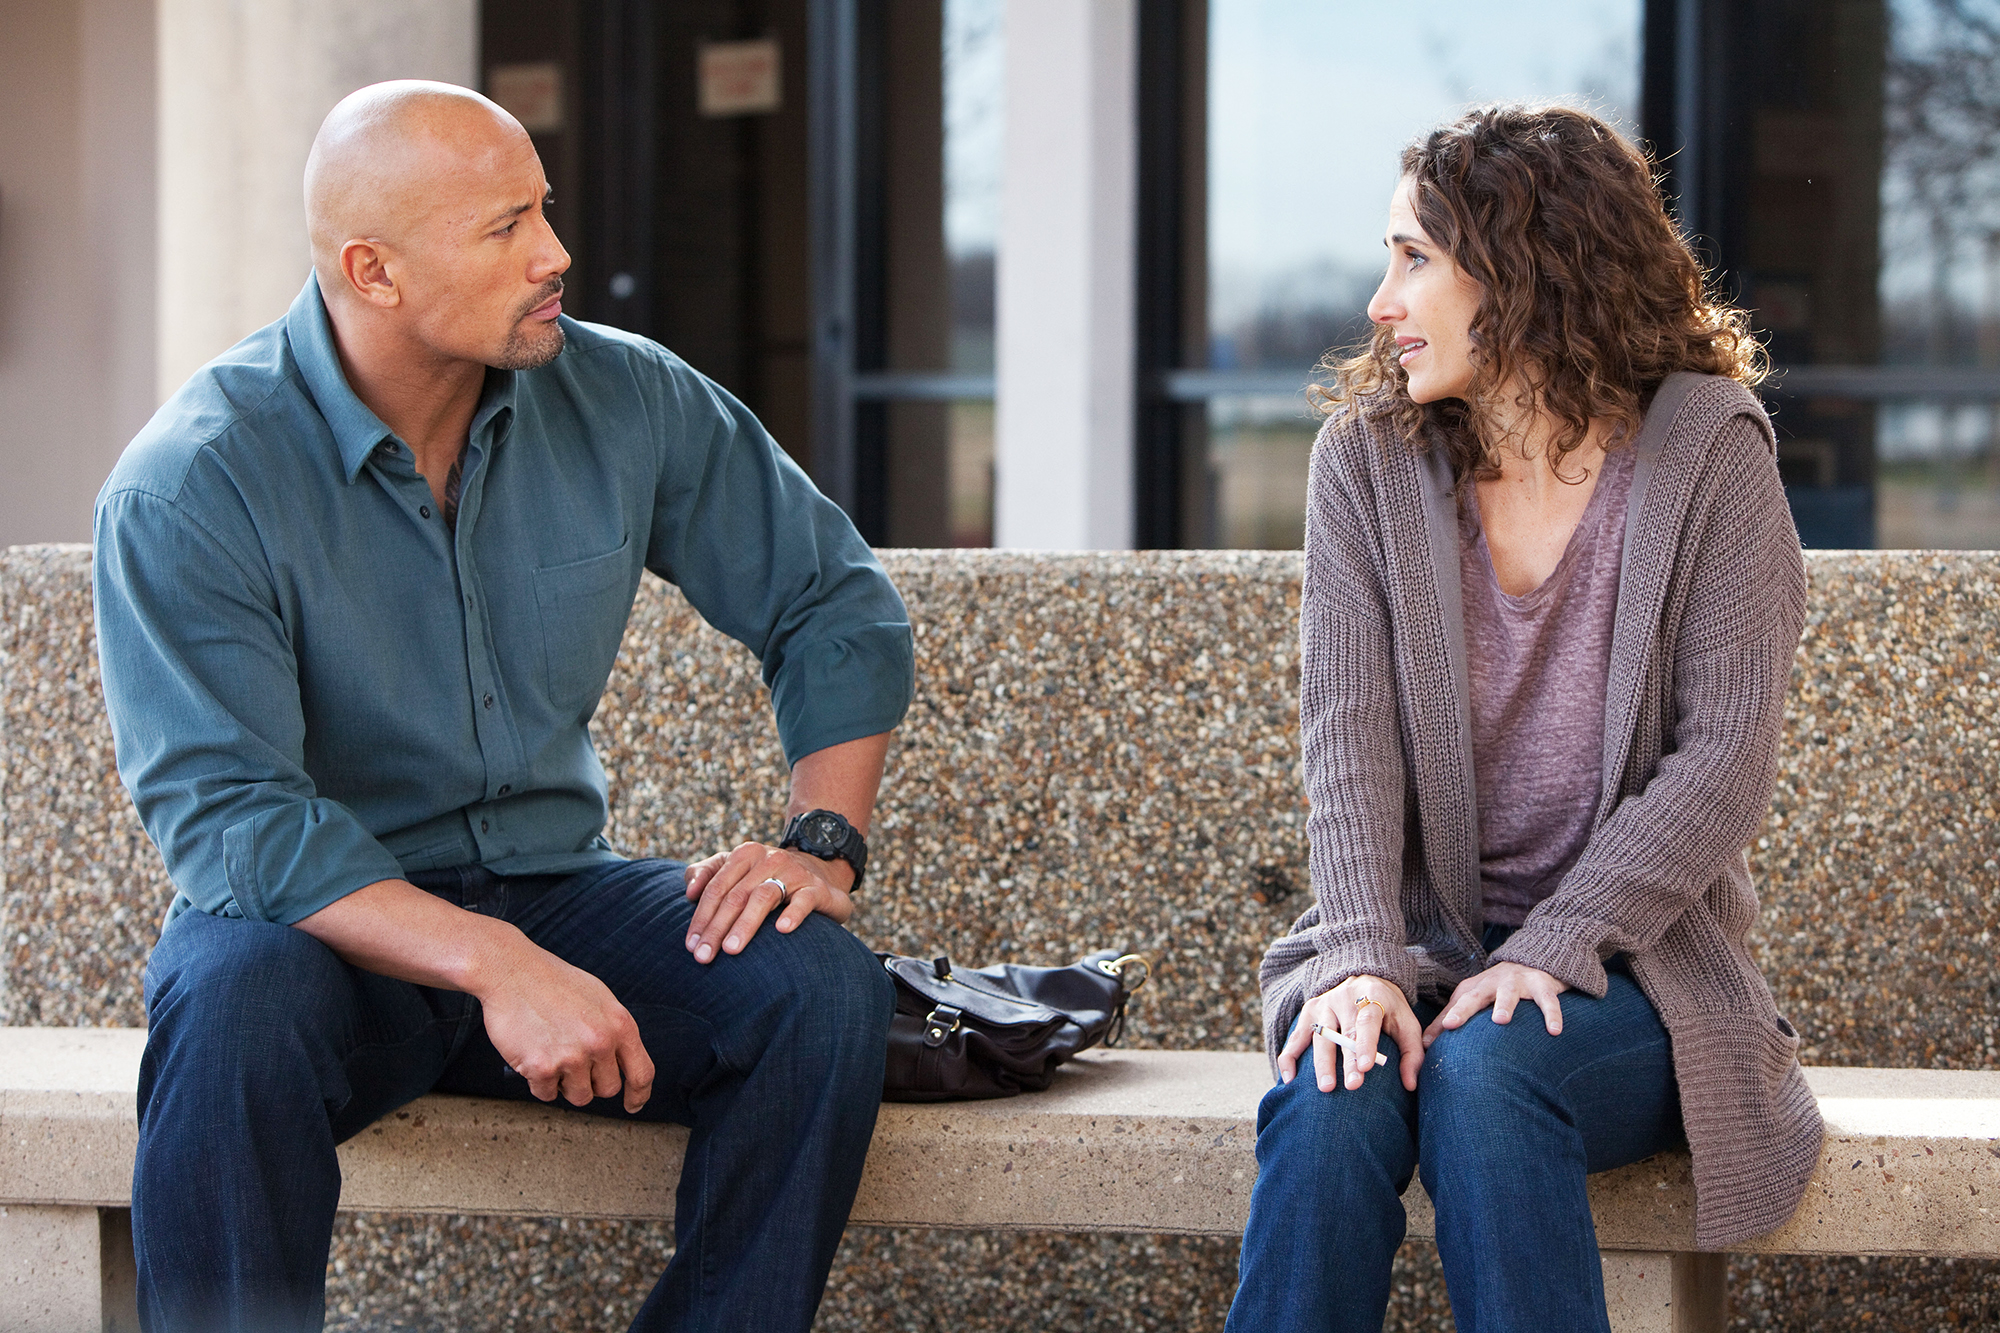 Johnson and Melina Kanakaredes in Snitch, 2013.